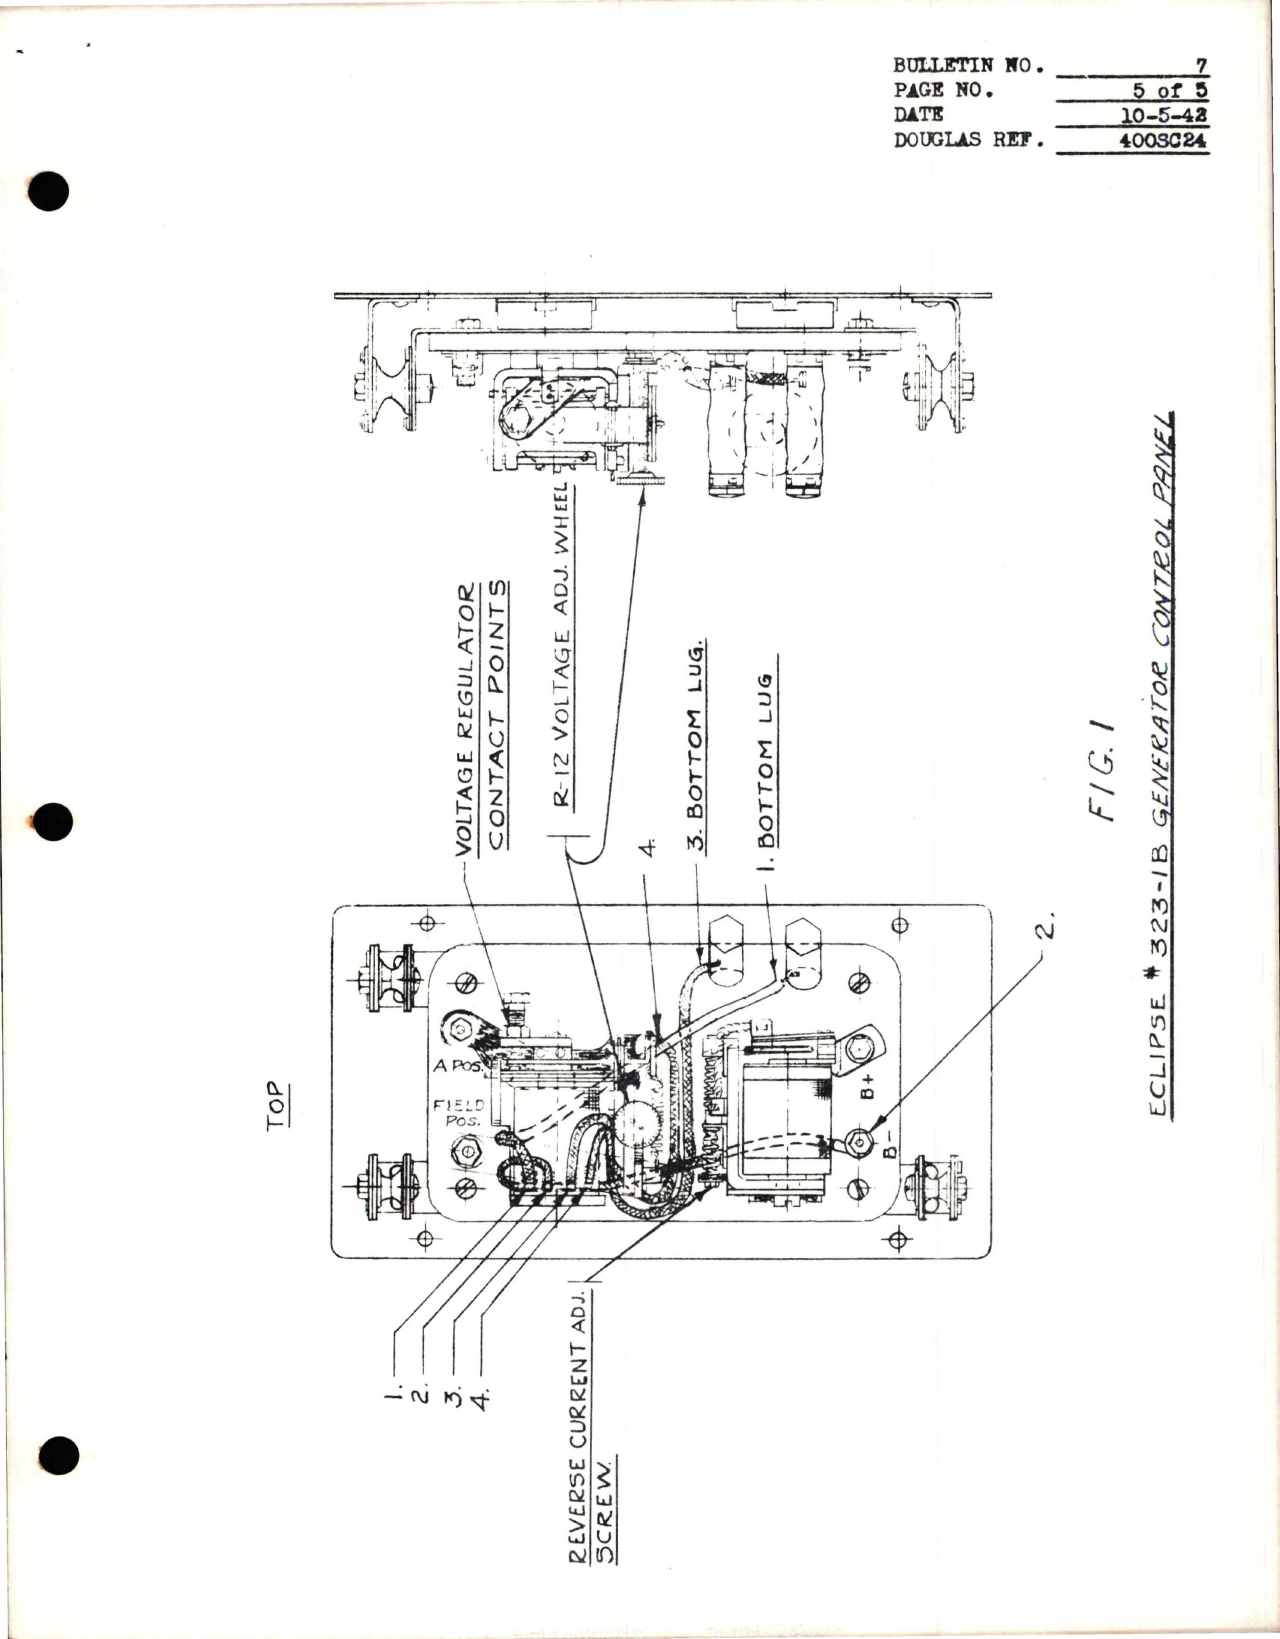 Sample page 5 from AirCorps Library document: Rework Generator Control Panels and Provide a Method of Adjustment - Eclipse 323-1A to 323-1B